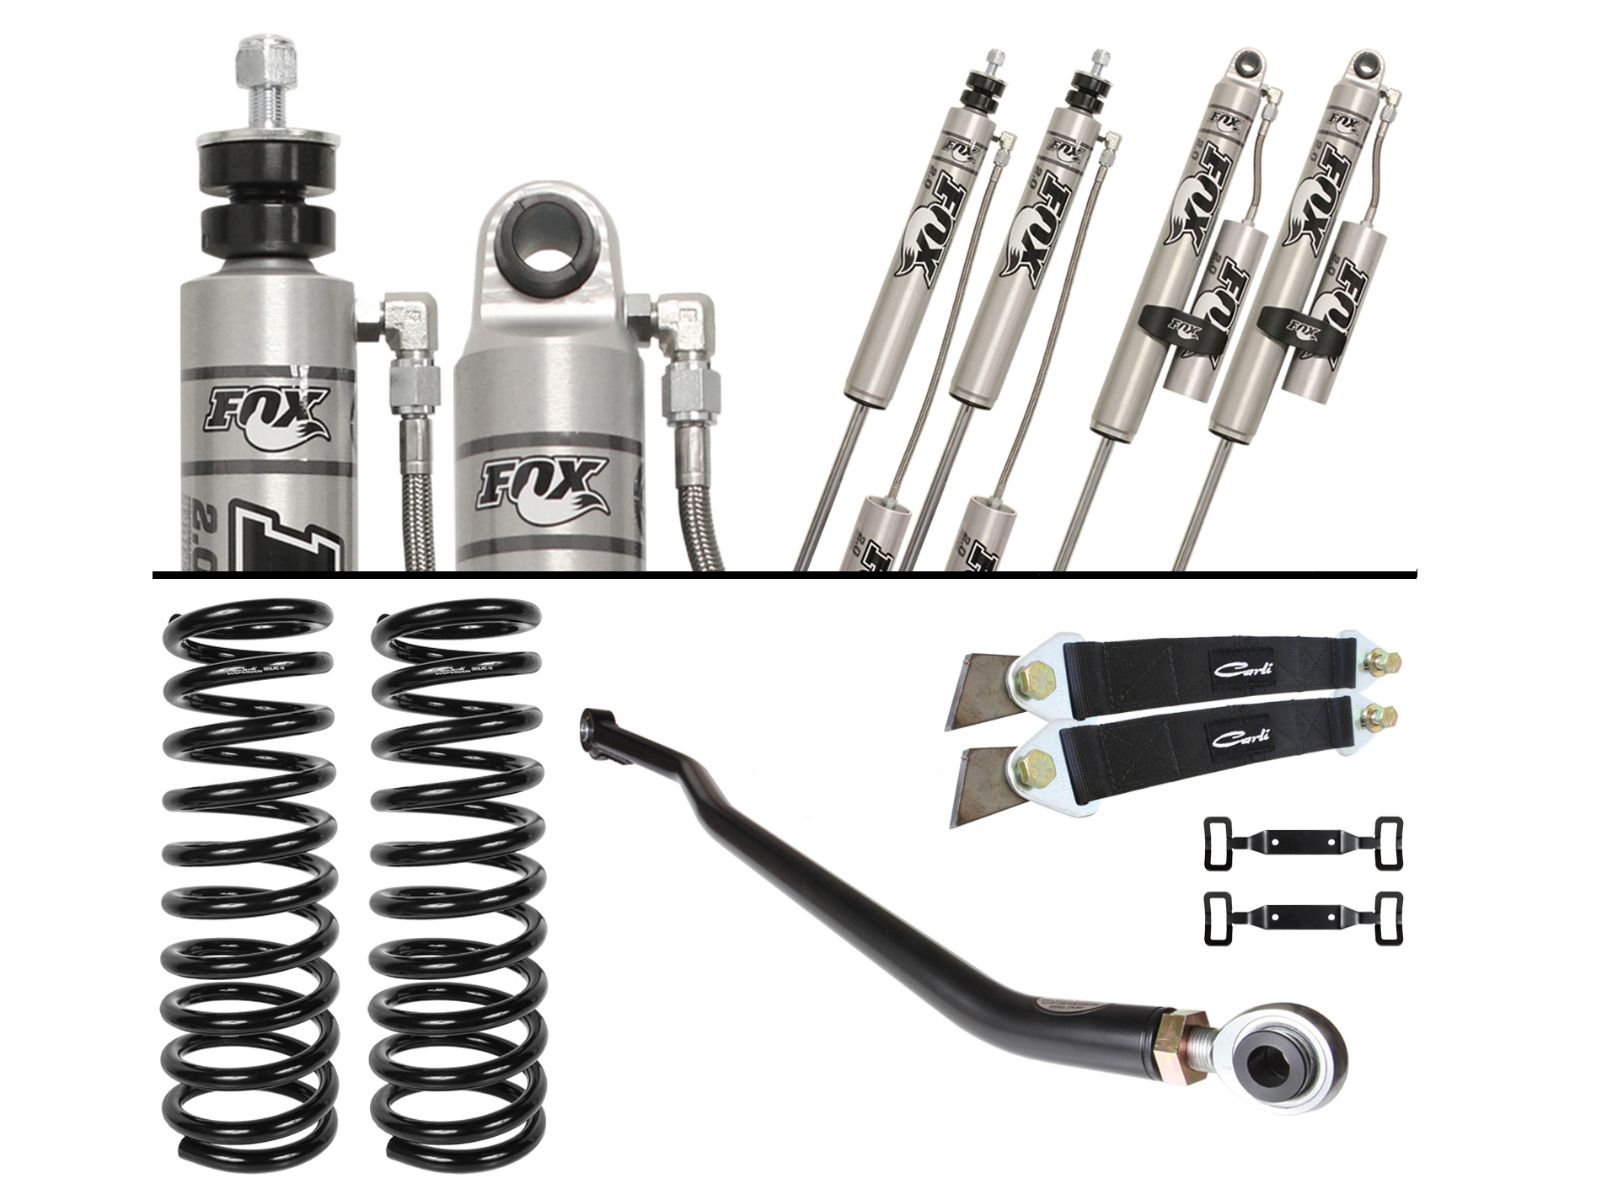 3" 2010-2012 Dodge Ram 3500 4wd (w/Diesel Engine) Backcountry Lift System by Carli Suspension